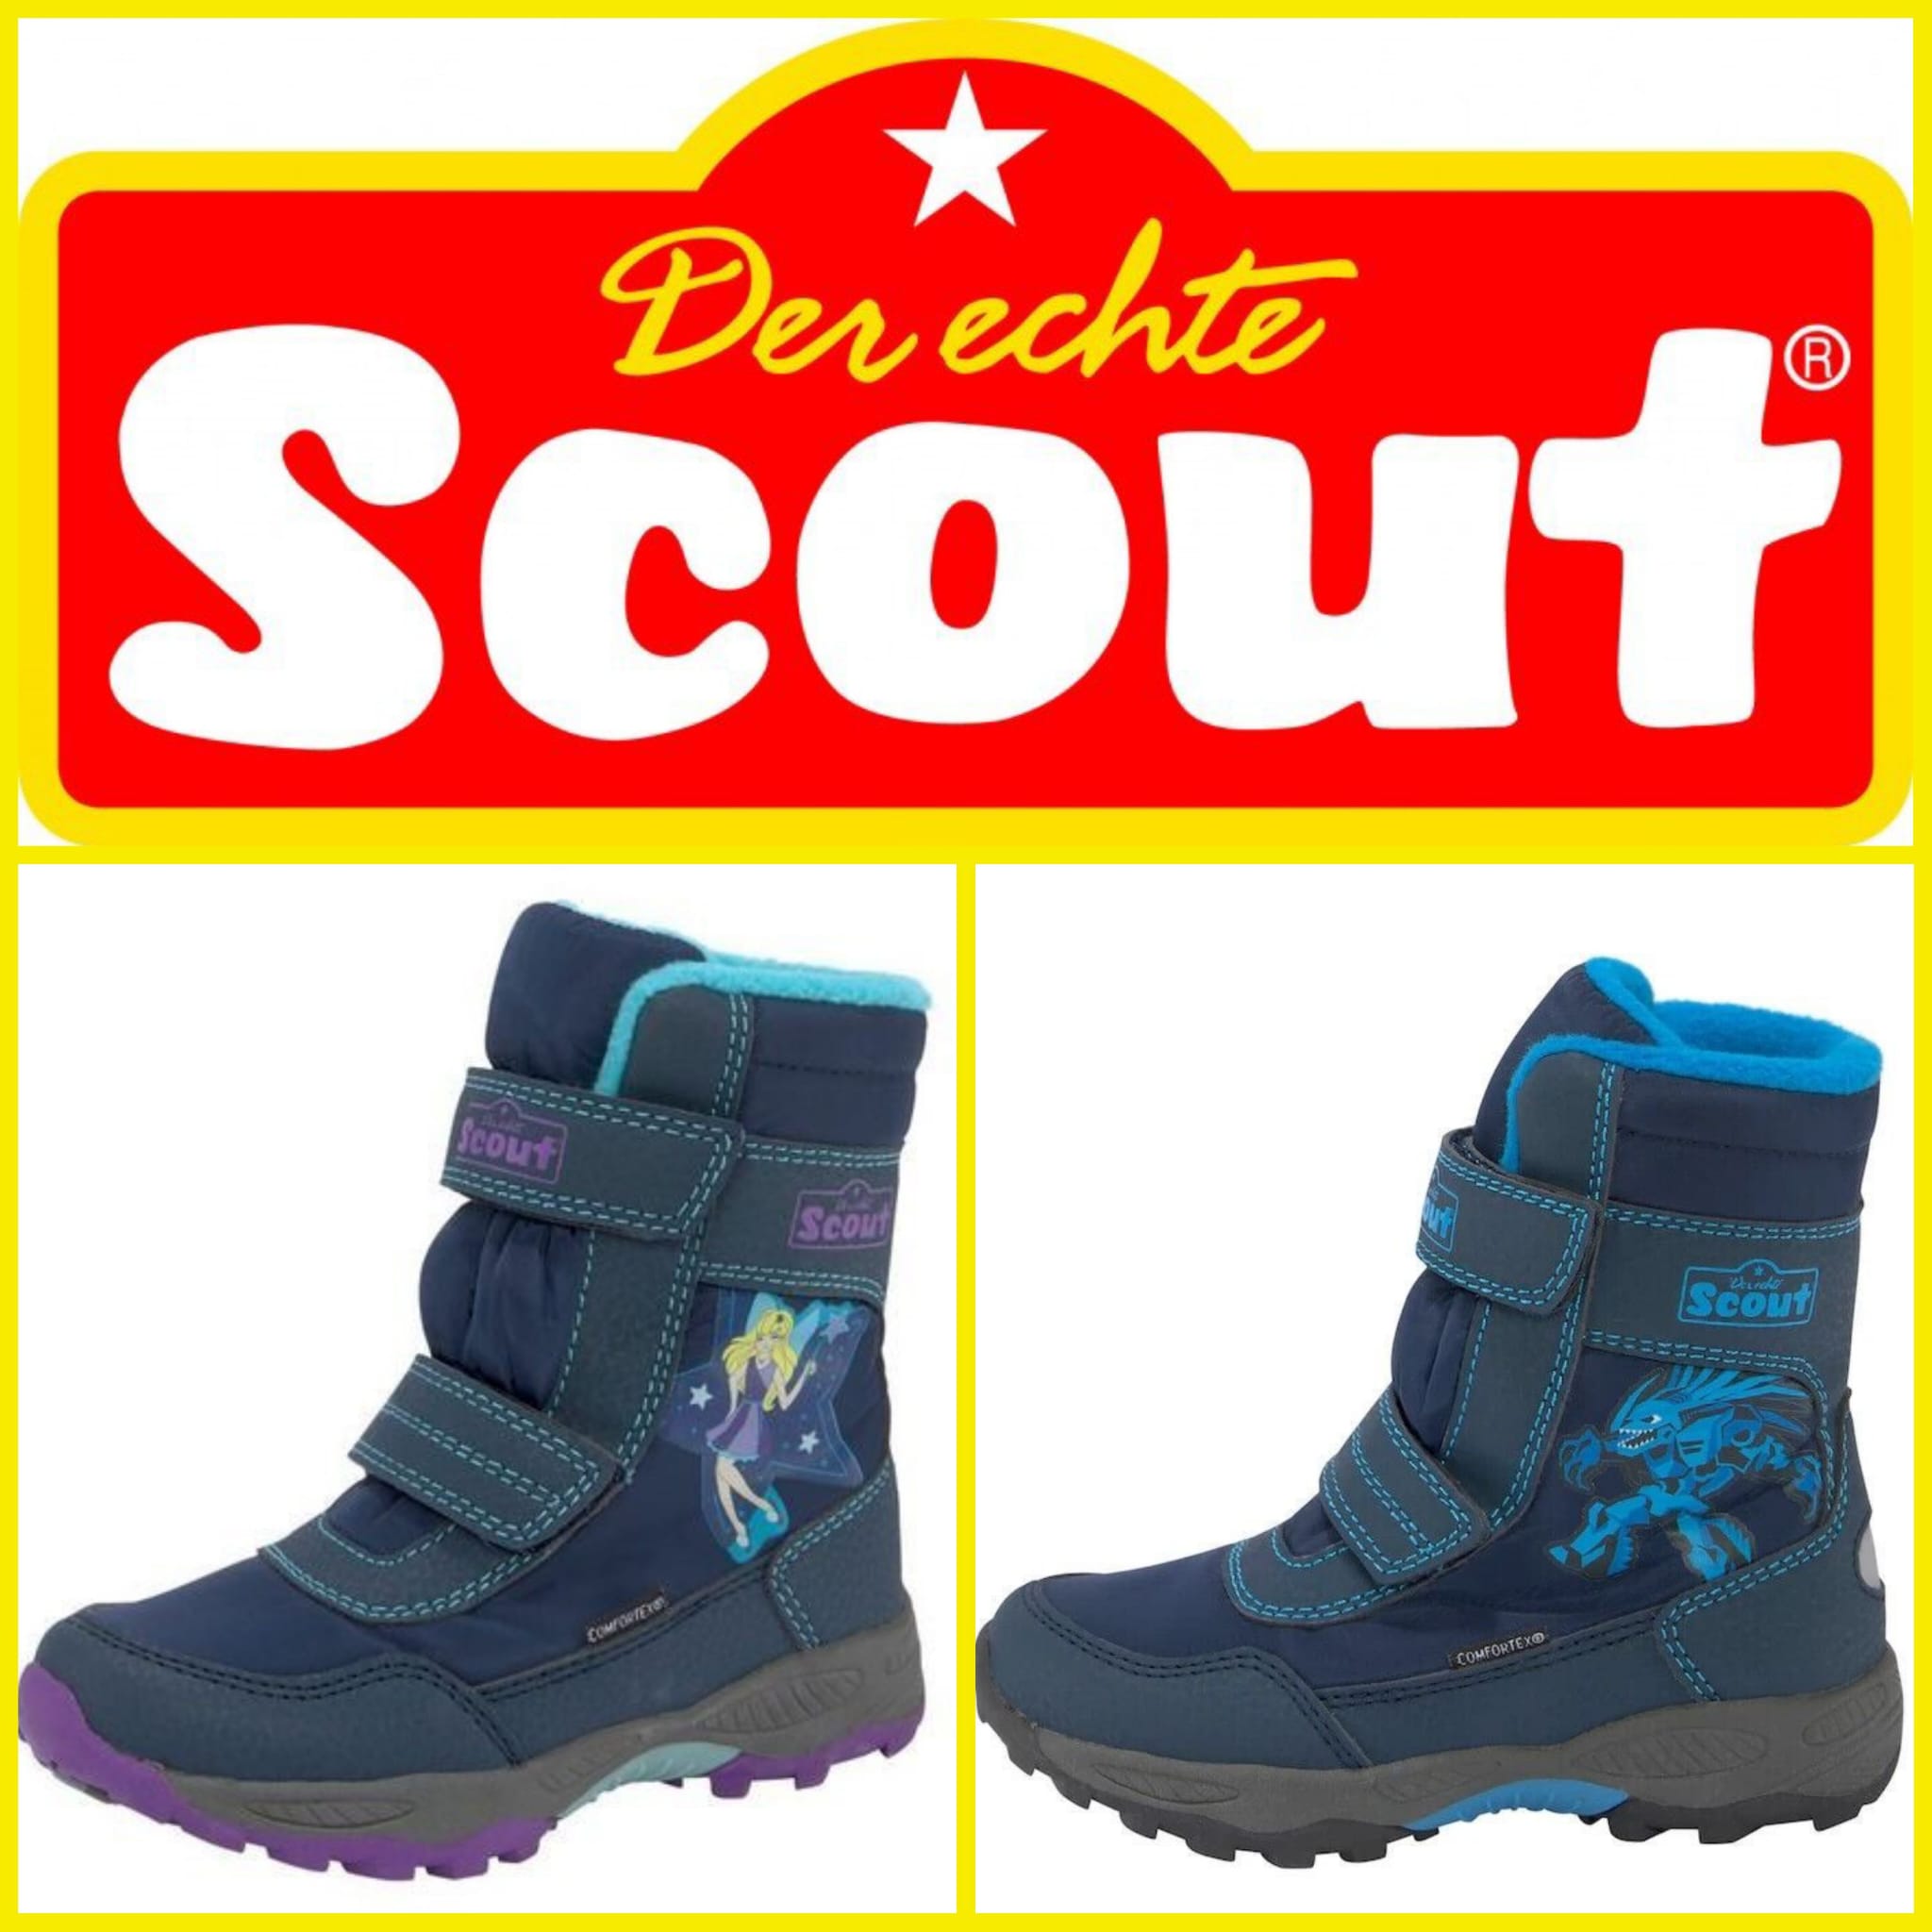 Children's winter boots from Scout